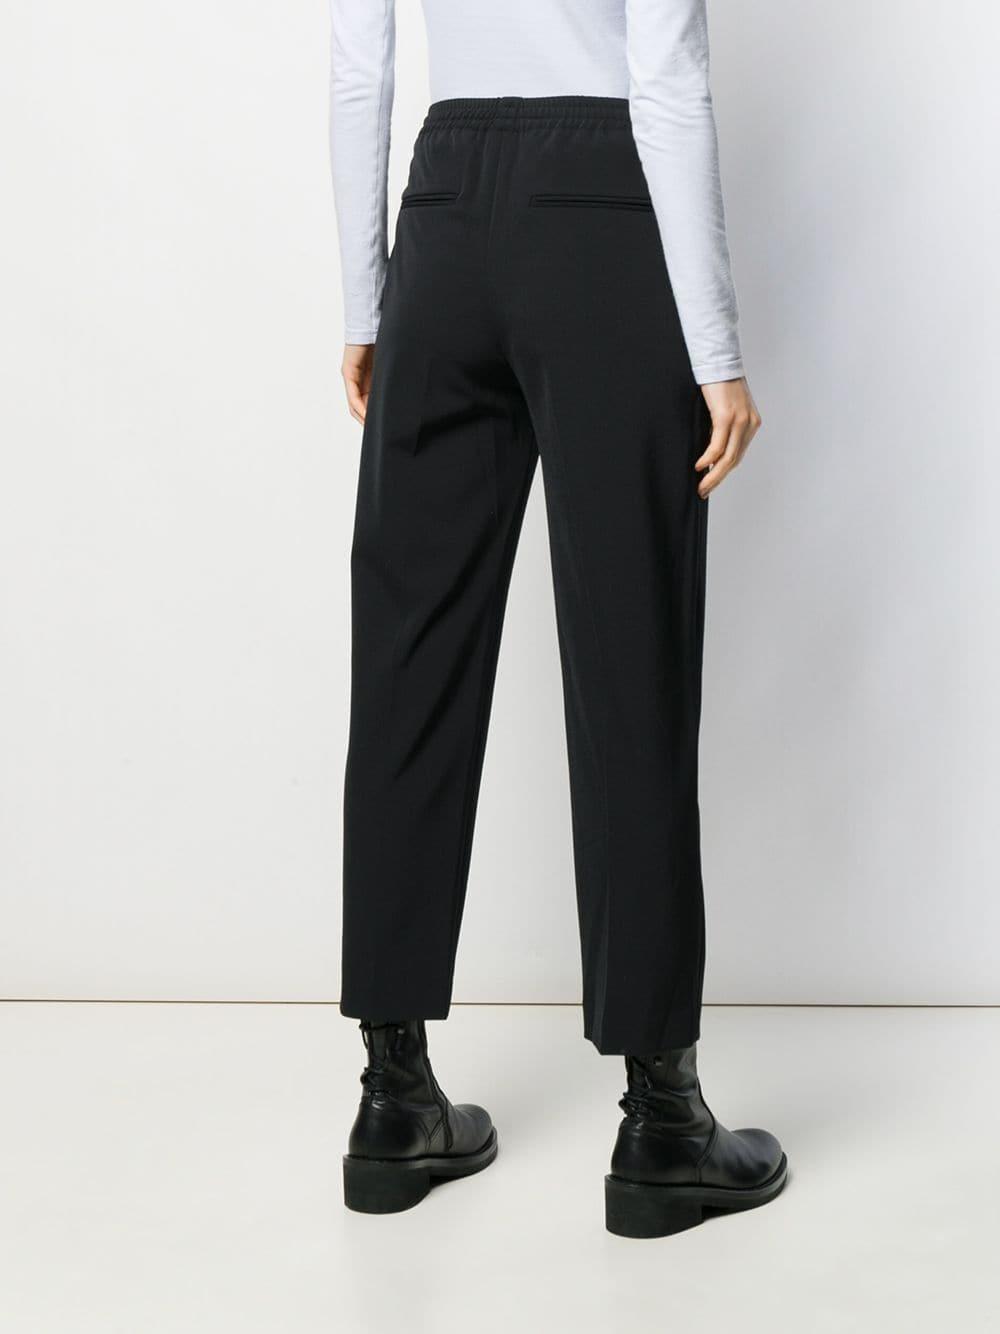 JOSEPH Wool Cropped Pleated Trousers in Black - Lyst